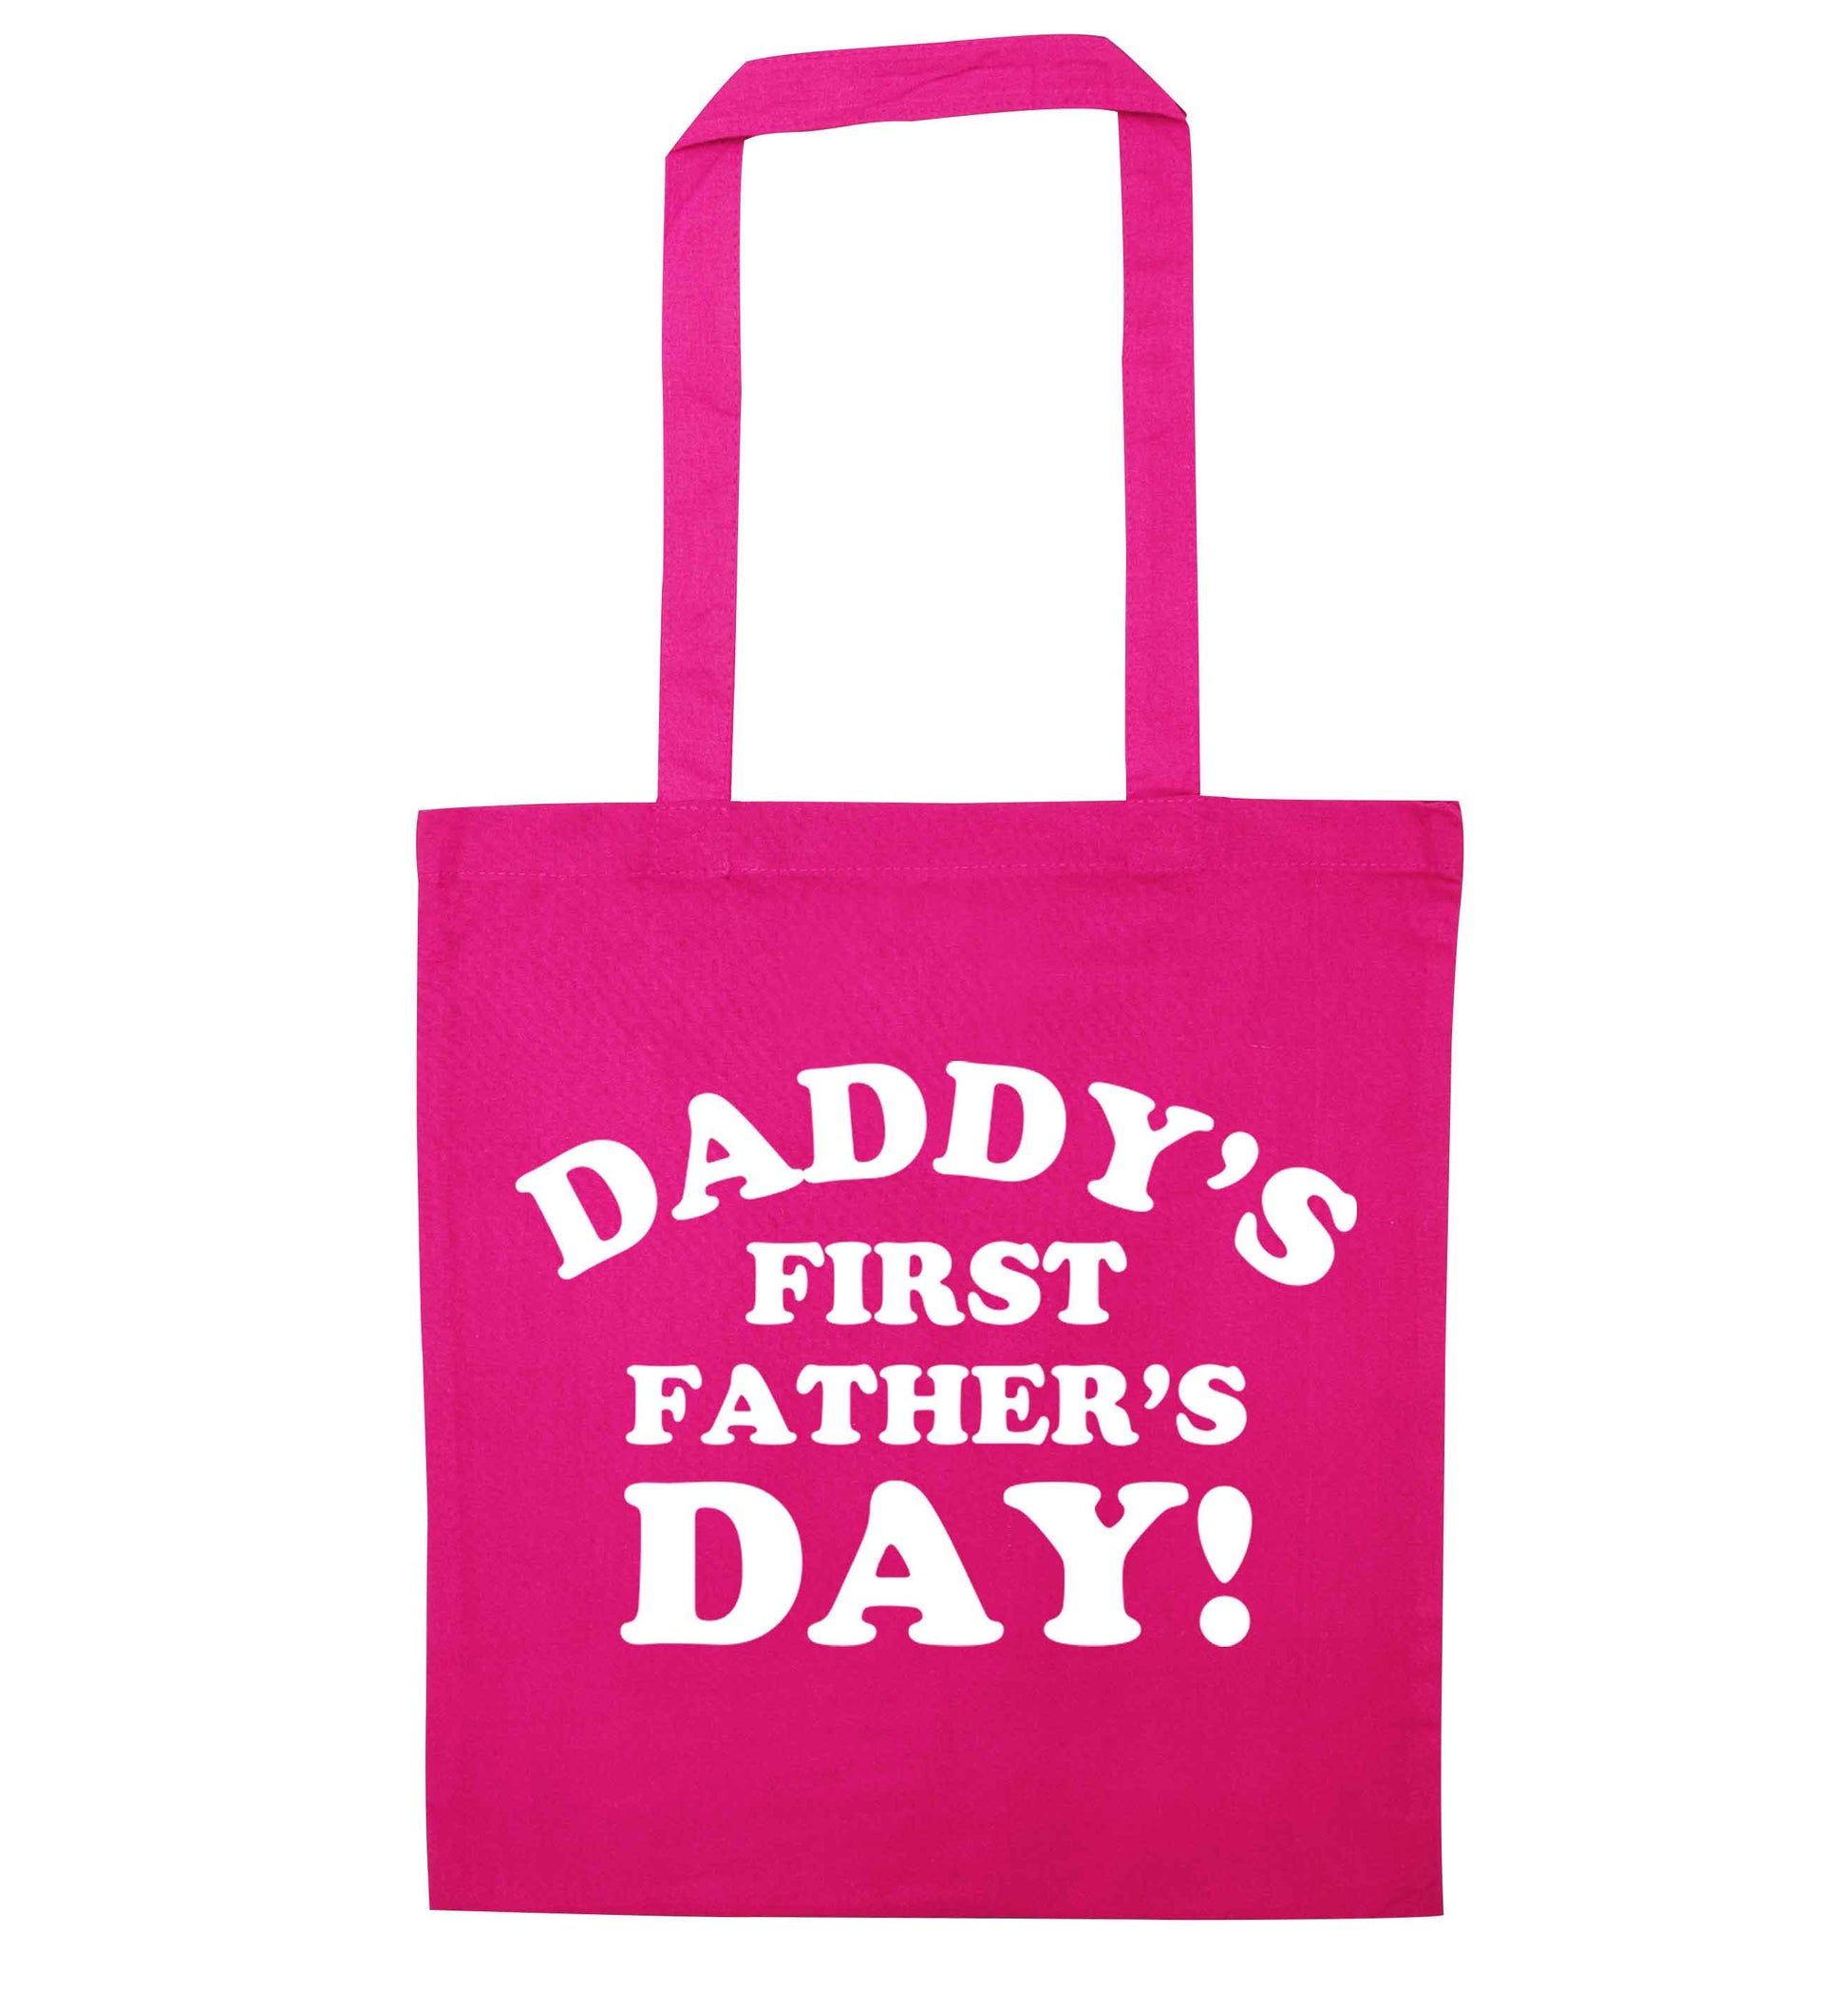 Daddy's first father's day pink tote bag